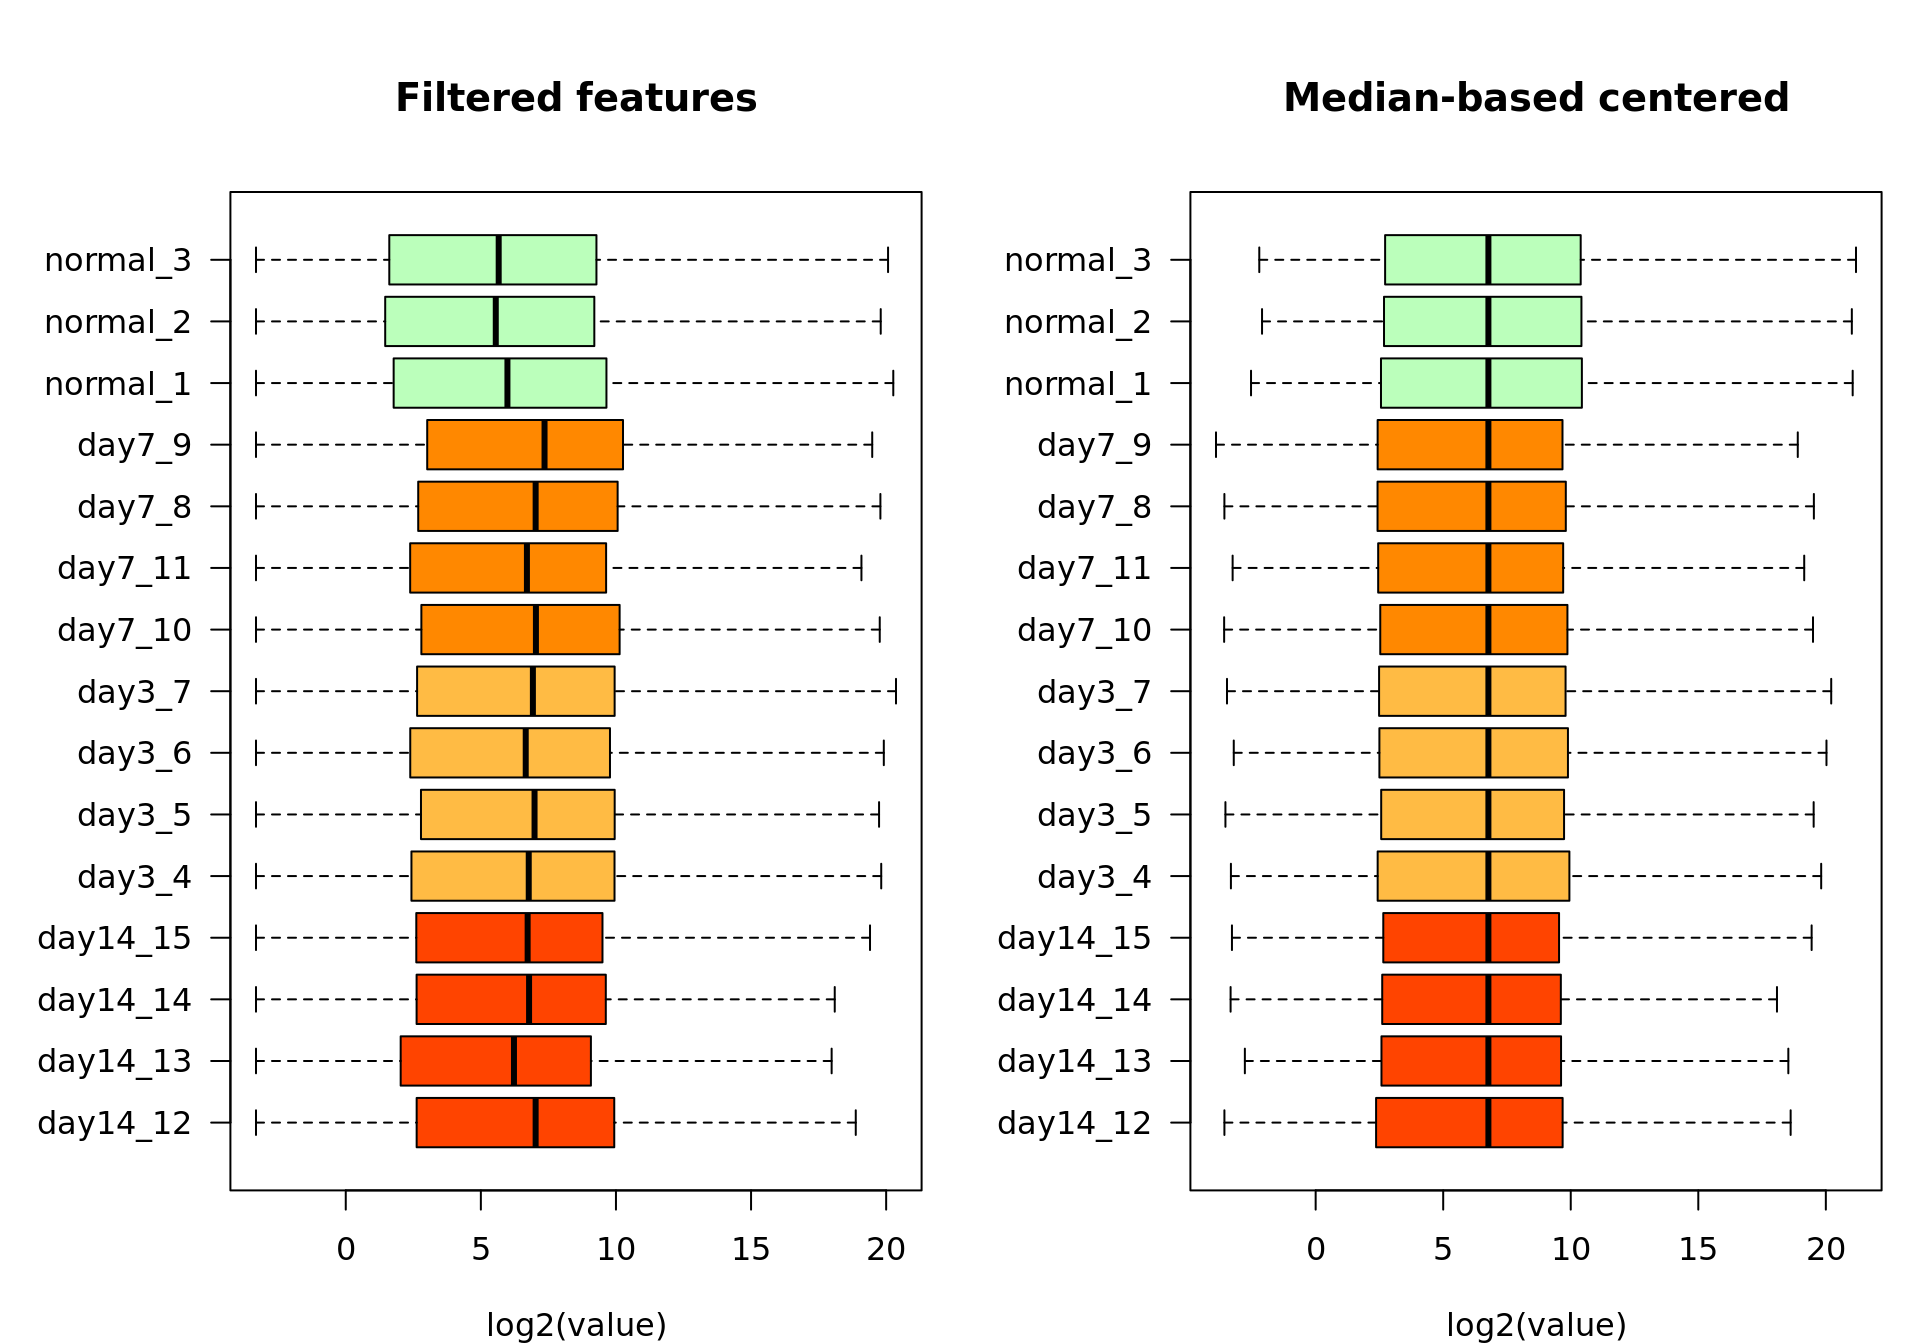 Box plot of the log2-transformed feature-filtered values before (left) and after (right) median-based standardization.  